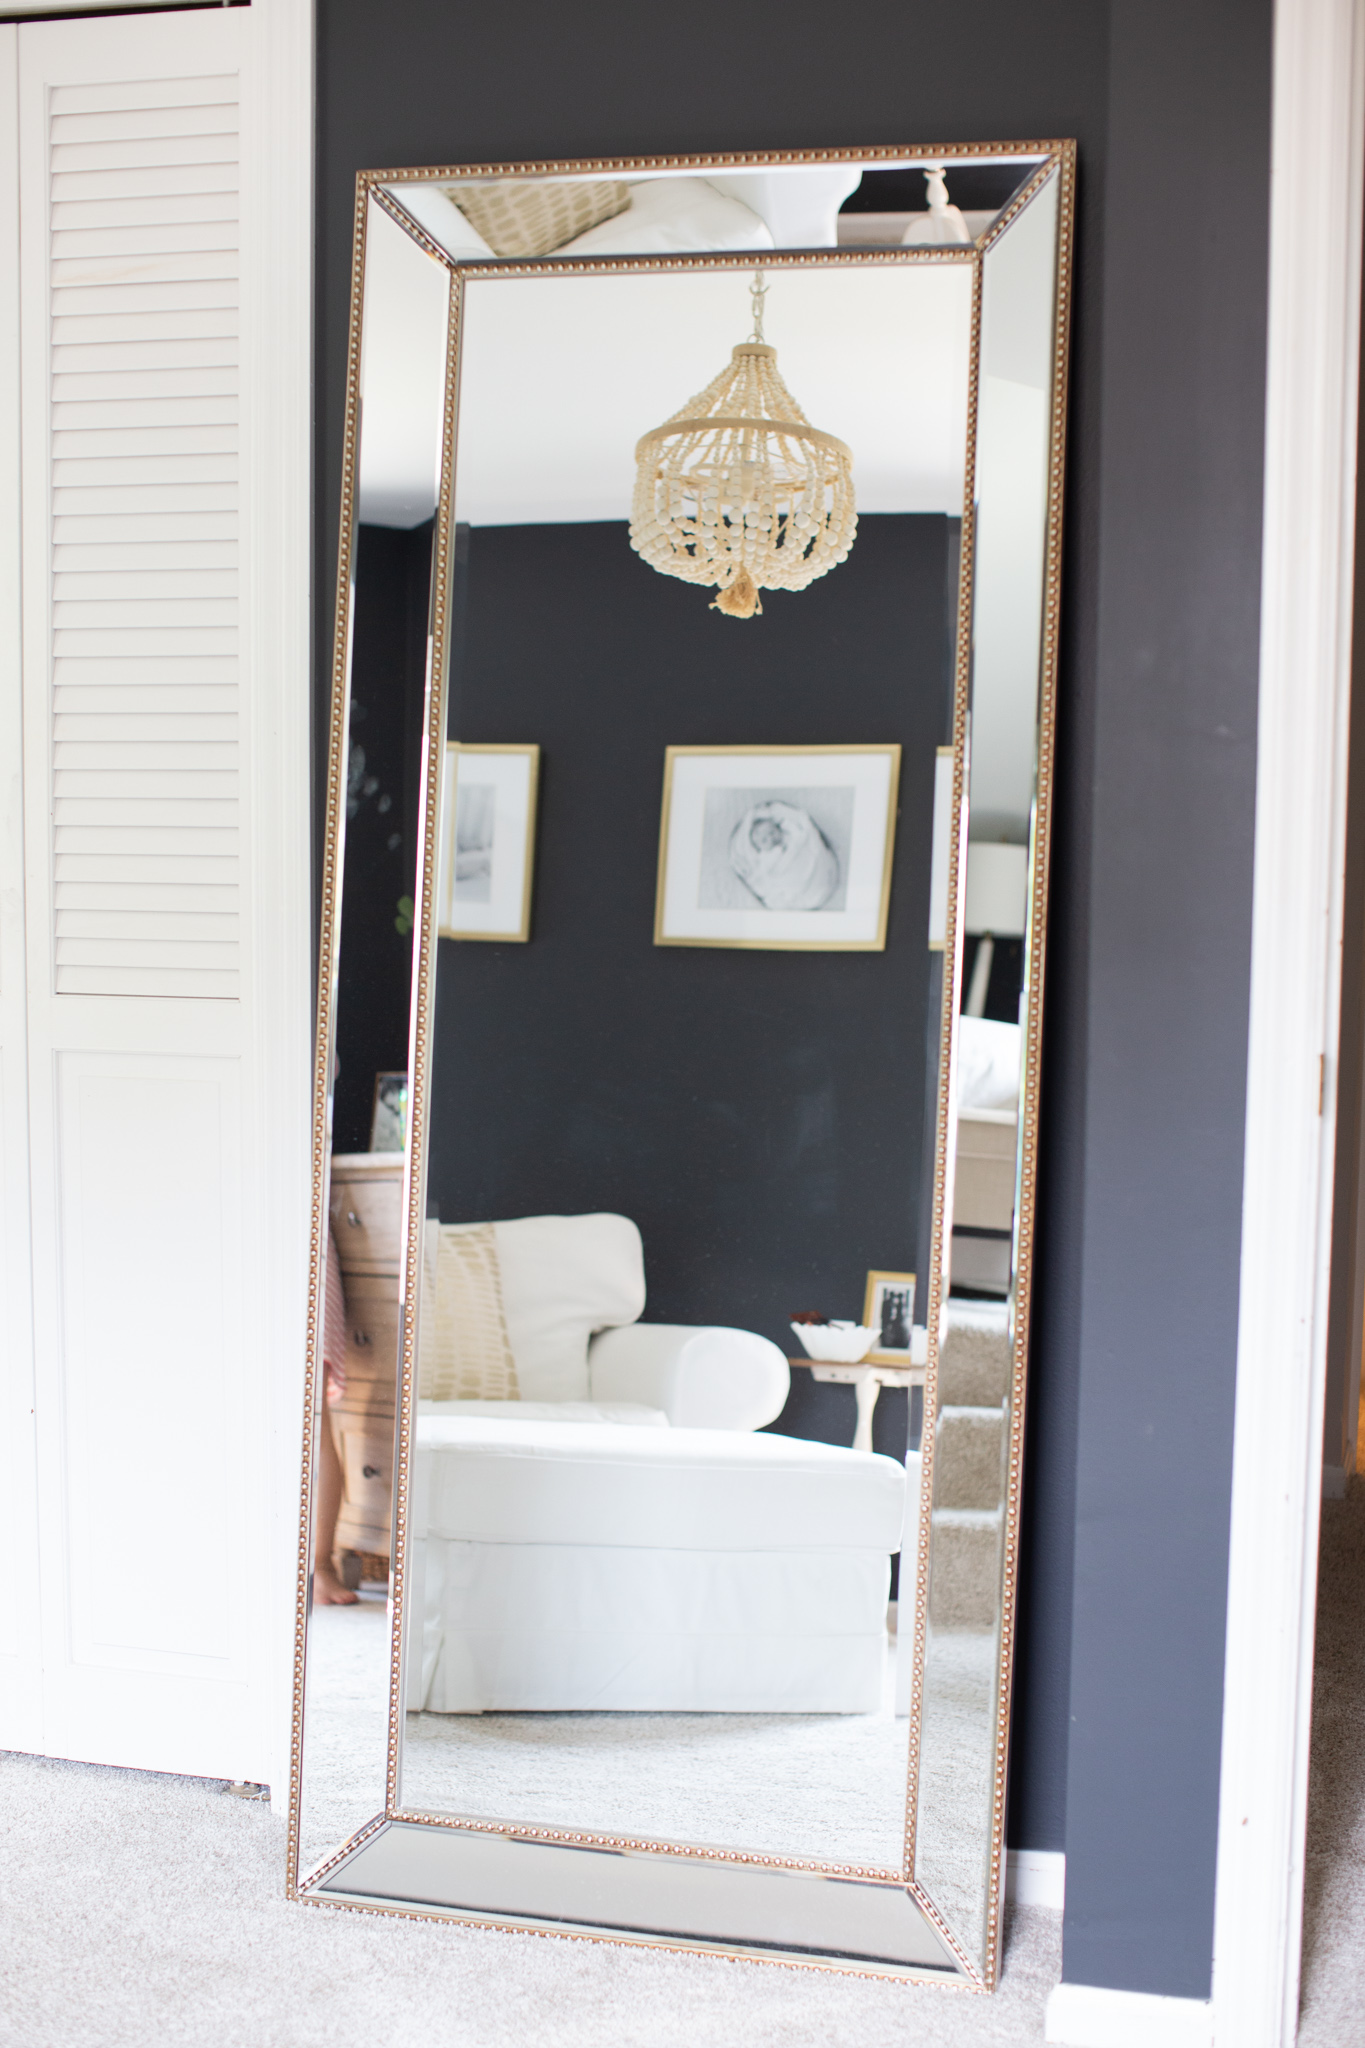 Master Bedroom Remodel Ideas by popular Ohio life and style blog, Coffee Beans and Bobby Pins: image of a embellished full body mirror. 